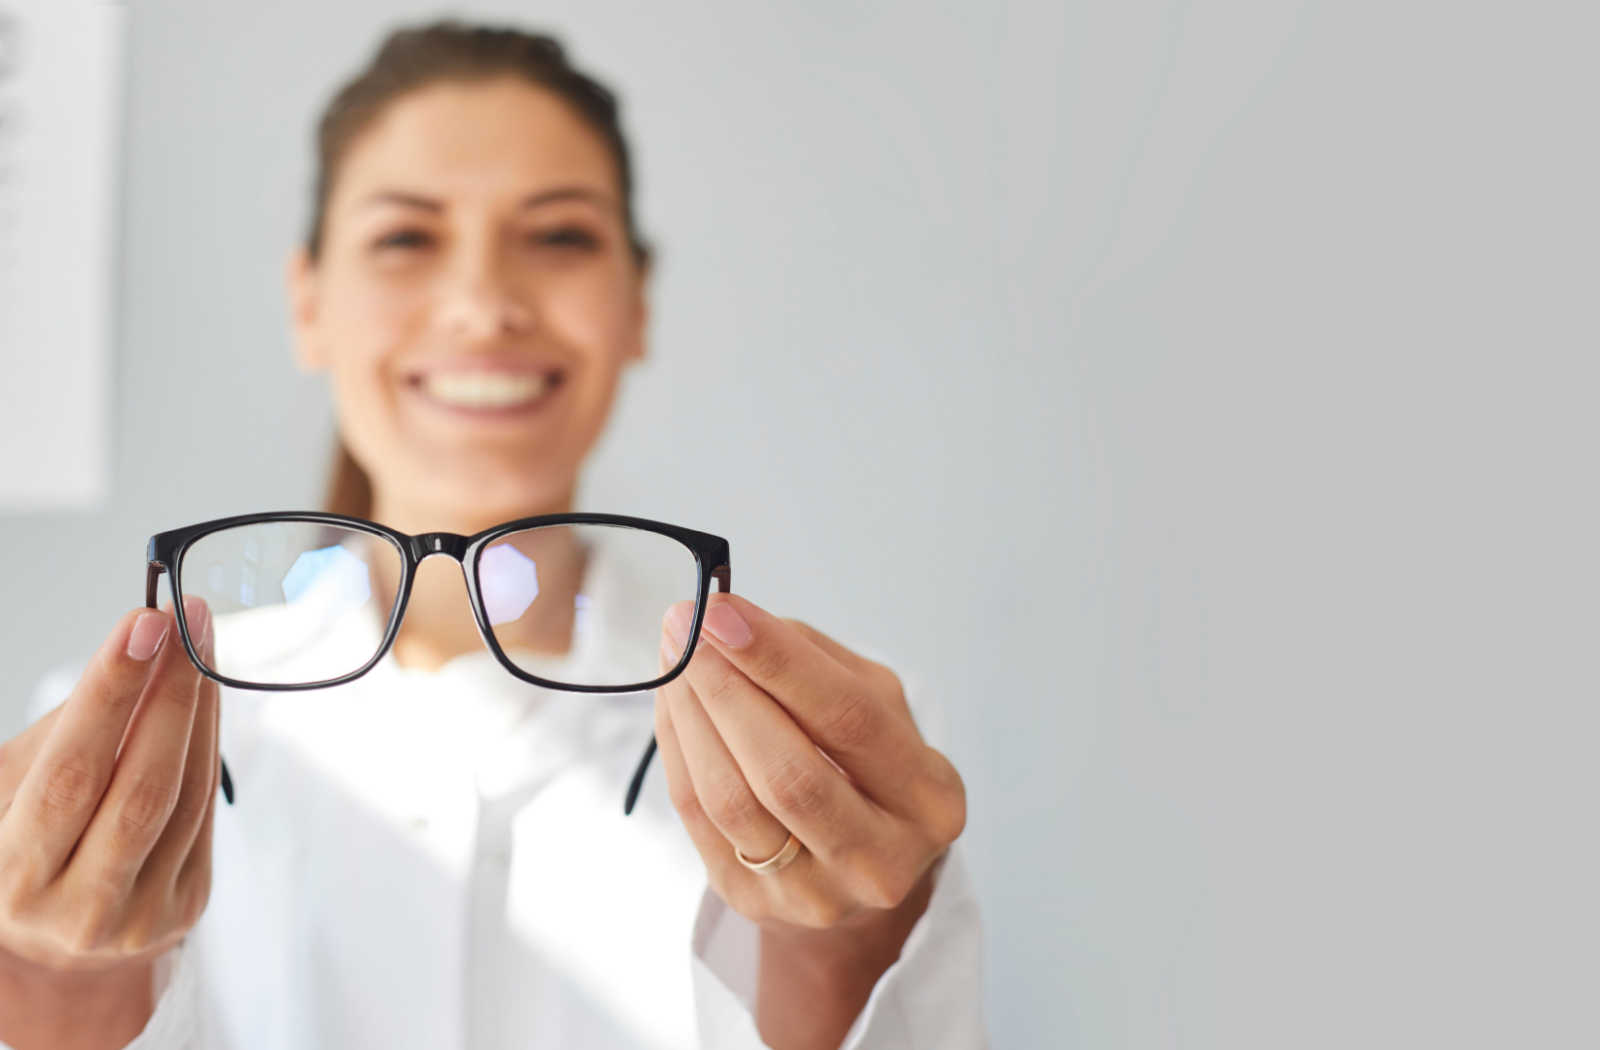 An optometrist holding a pair of prescription glasses as she smiles and looks directly at the camera.